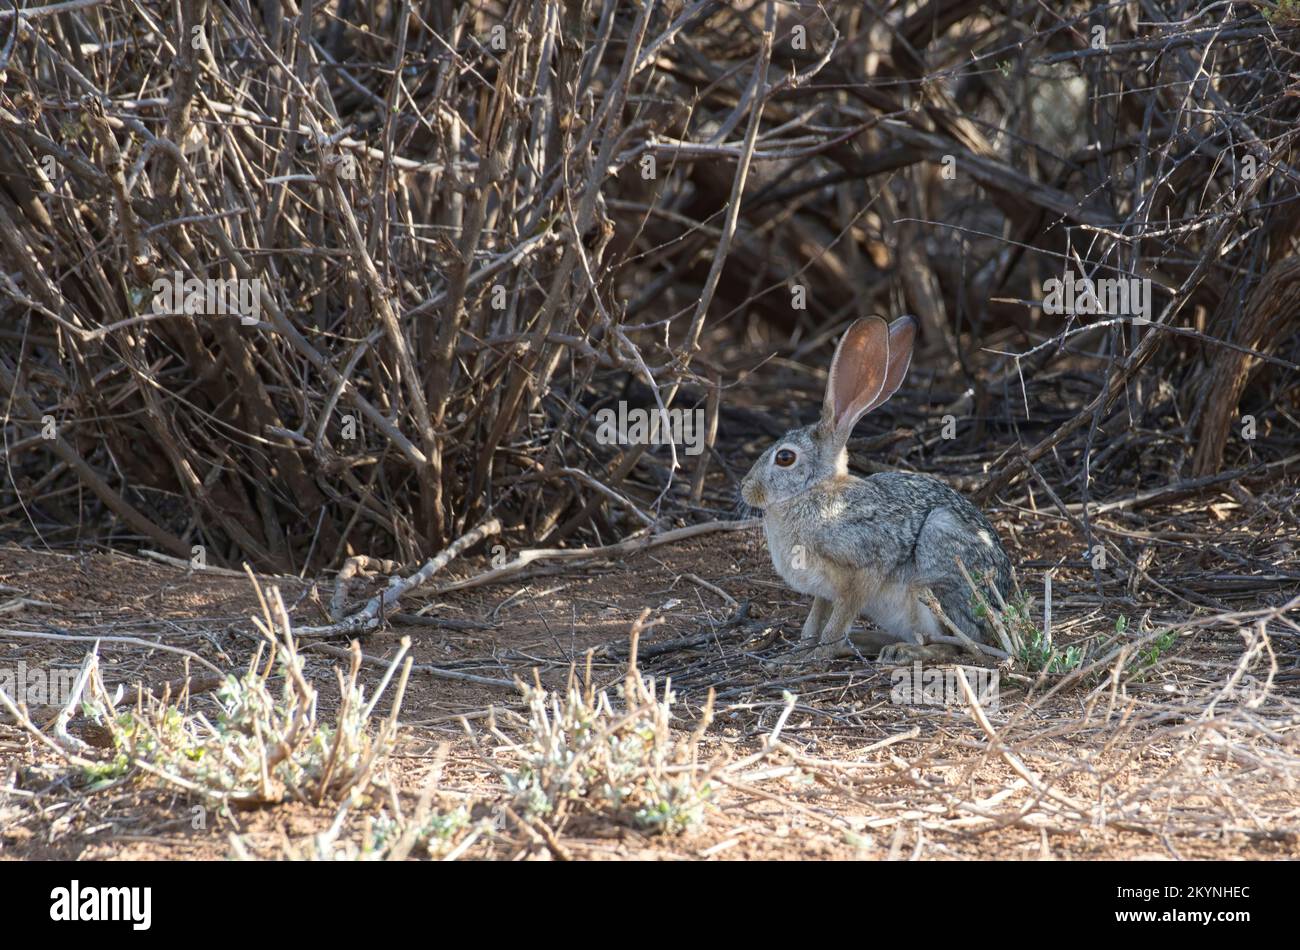 Cape or African hare (Lepus capensis) Stock Photo